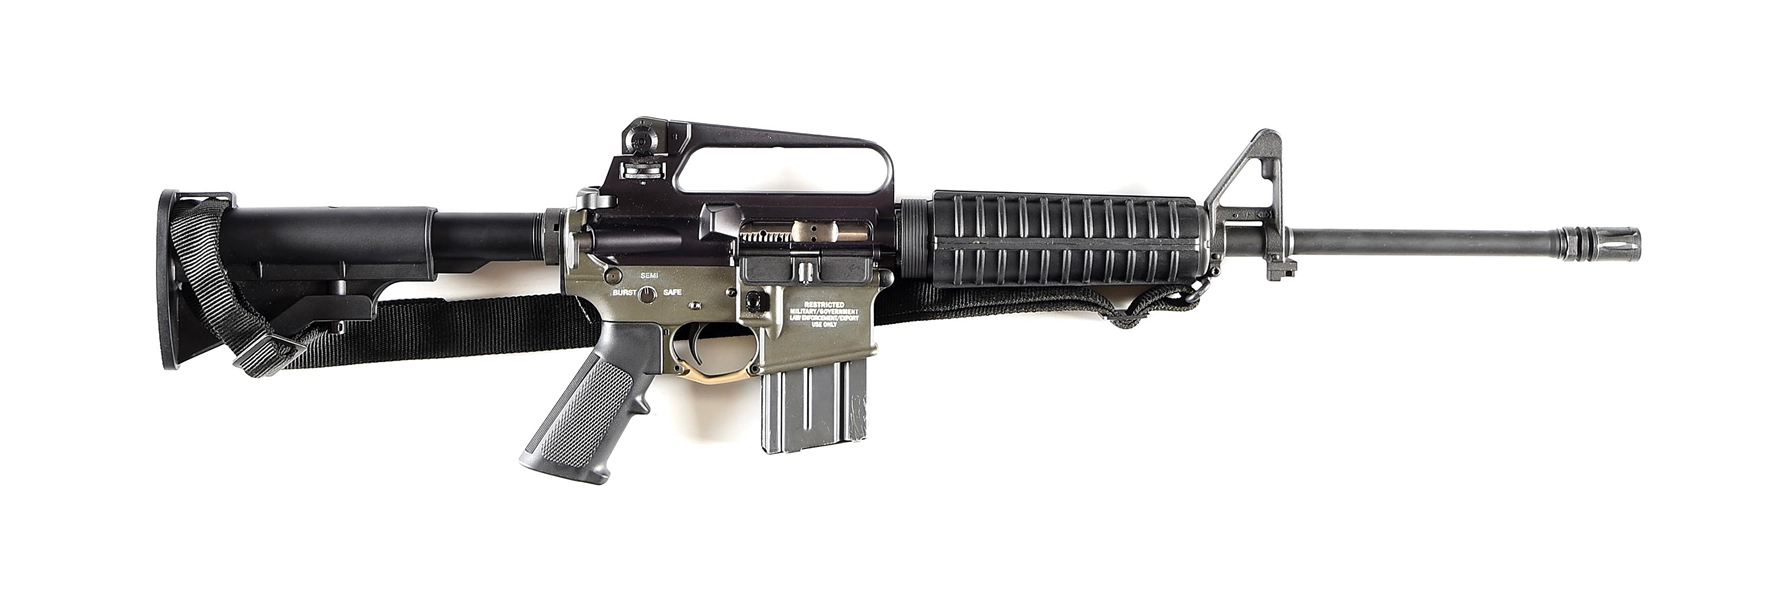 (C) COLT MARKED M16A2 SEMI-AUTOMATIC RIFLE, LOWER MARKED WITH BURST SELECTOR.